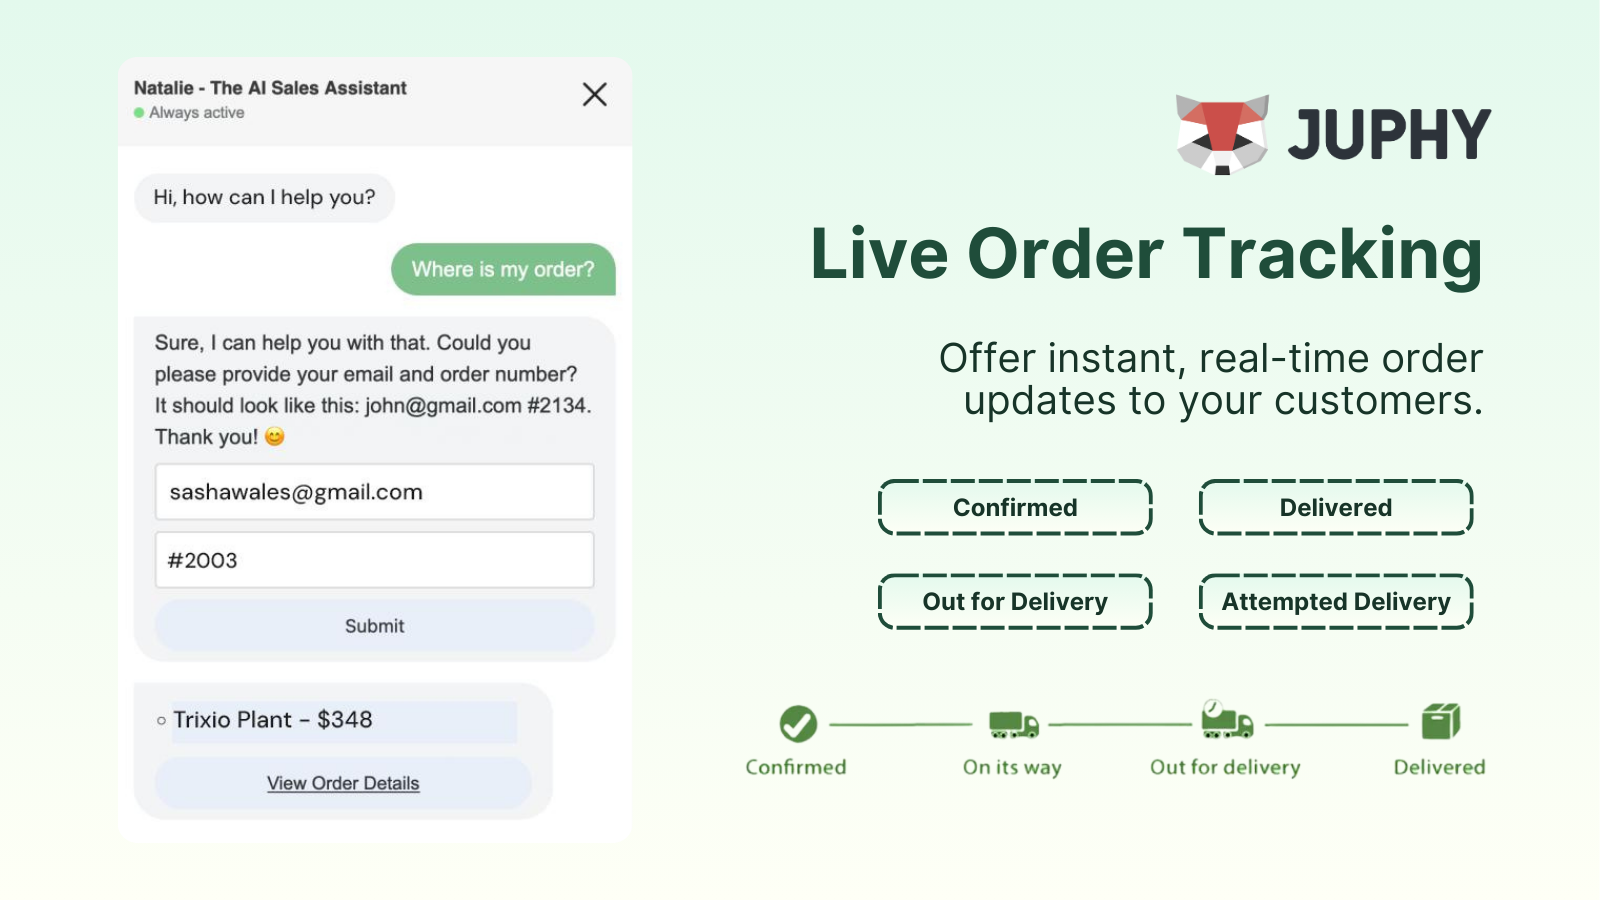 Offer instant, real-time order updates to your customers